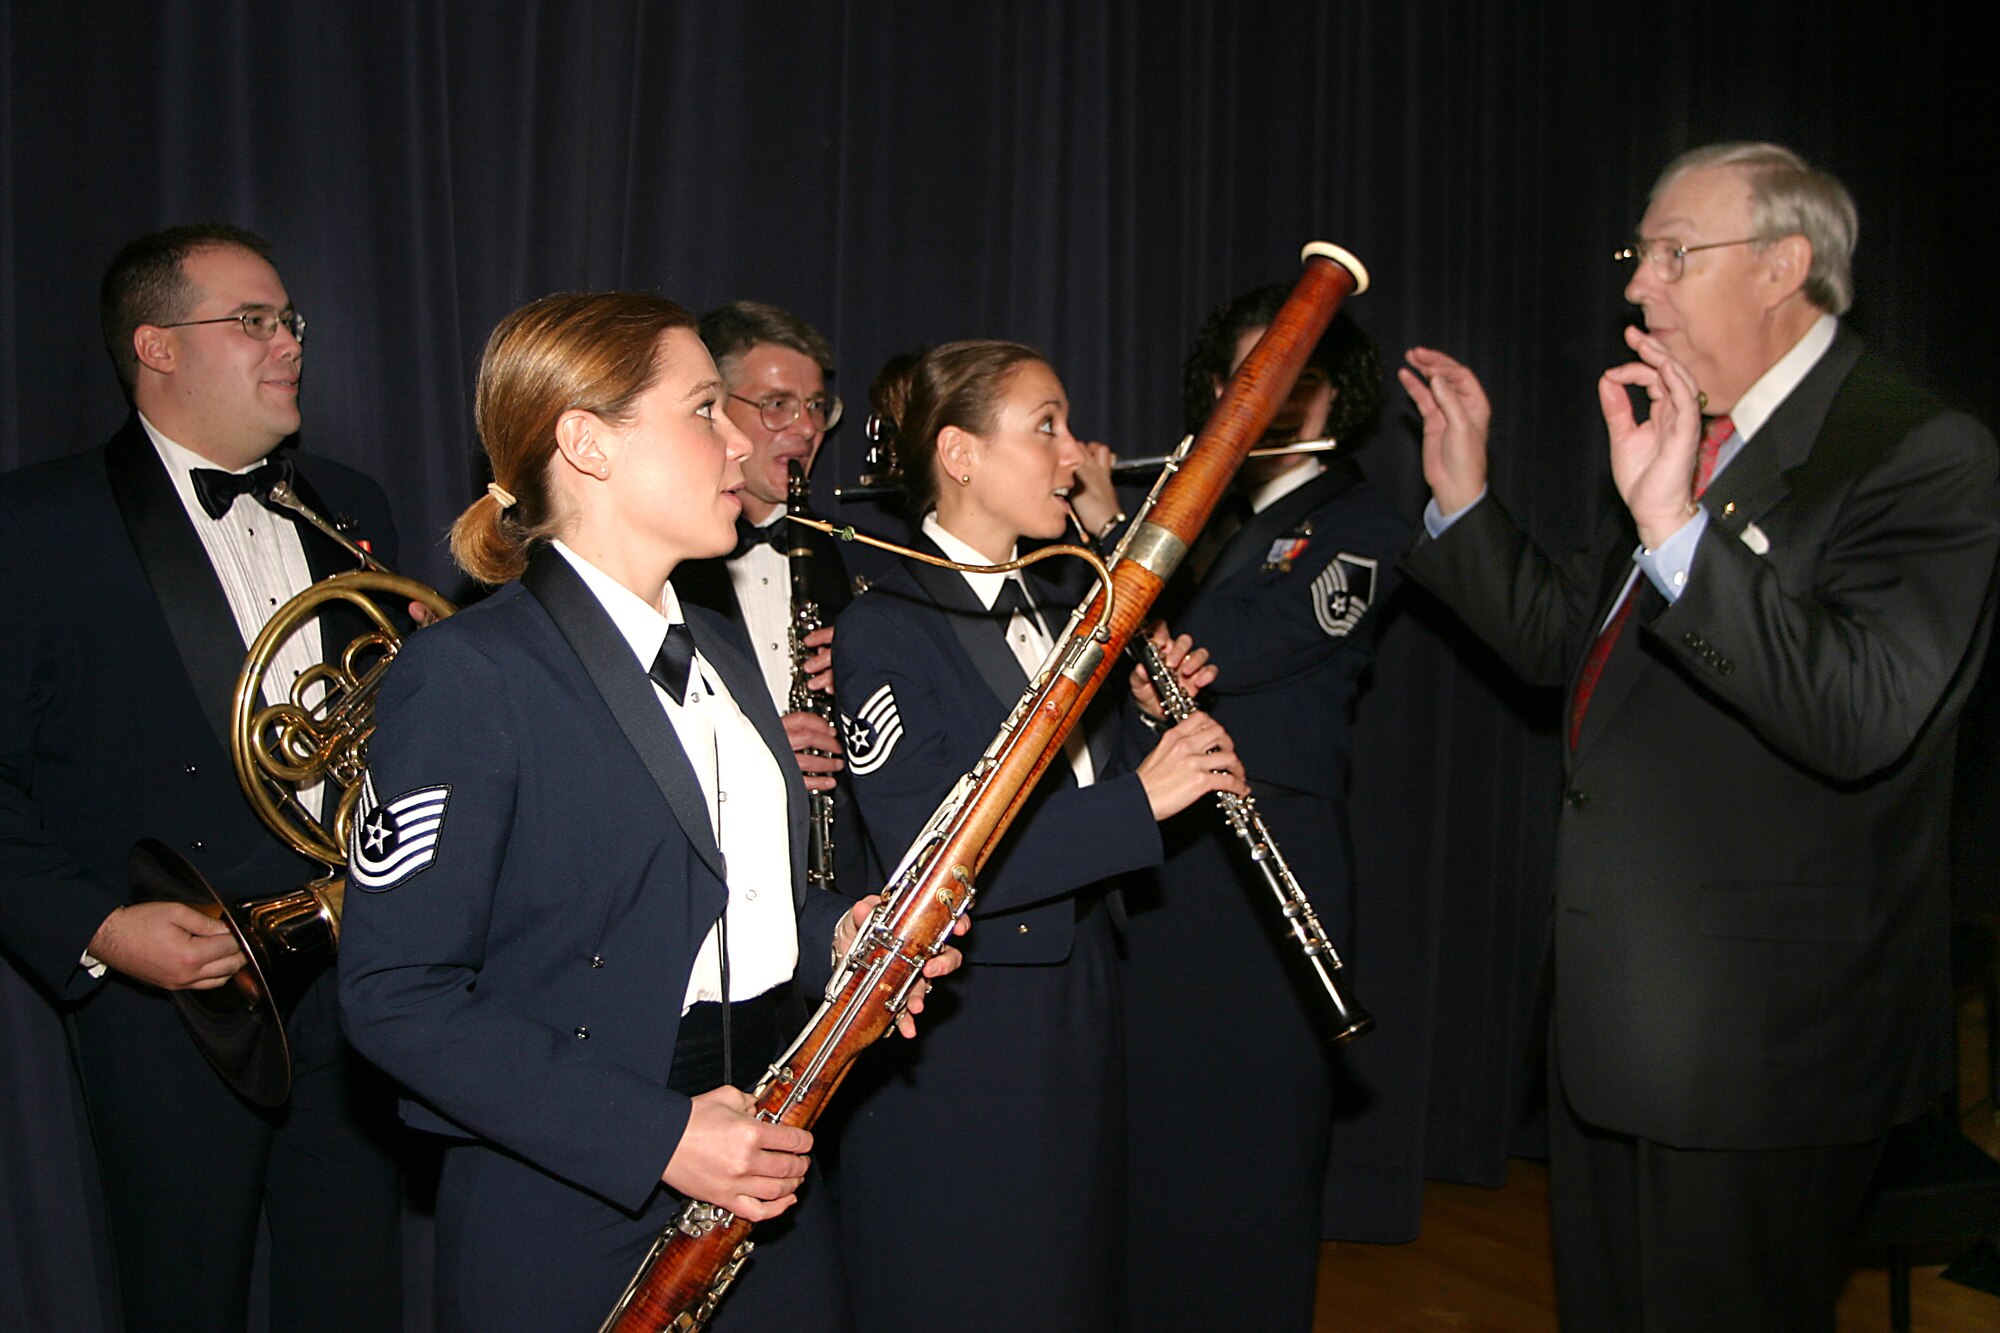 USAF Academy Winds Rampart Winds plays with Secretary Roche "conducting."